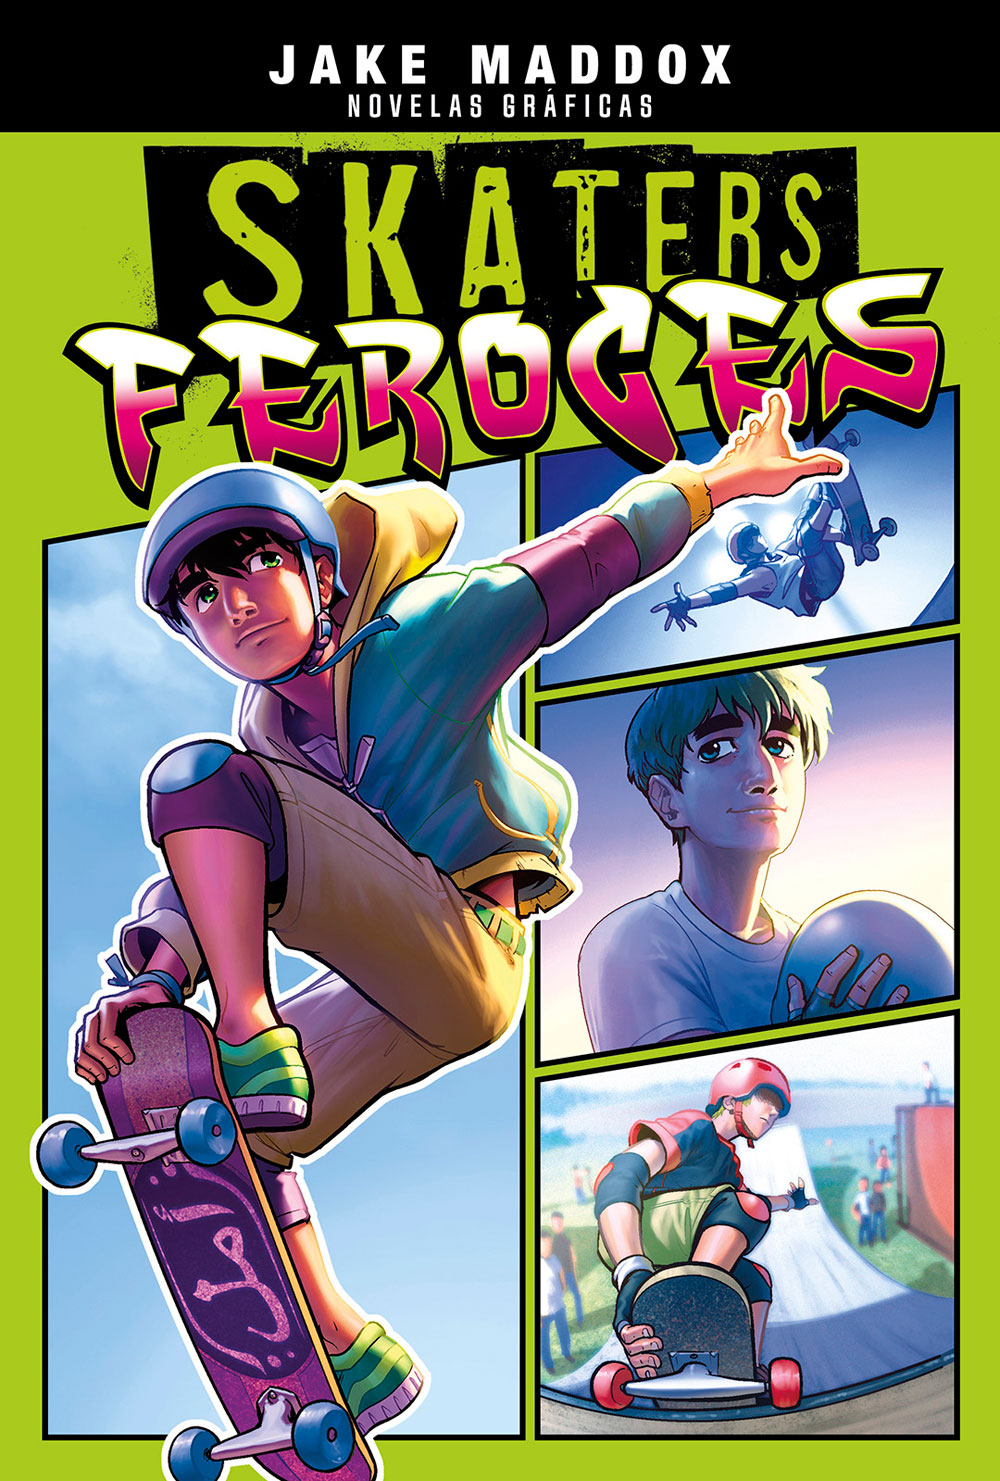 Skaters feroces Spanish Level 4+ Graphic Reader